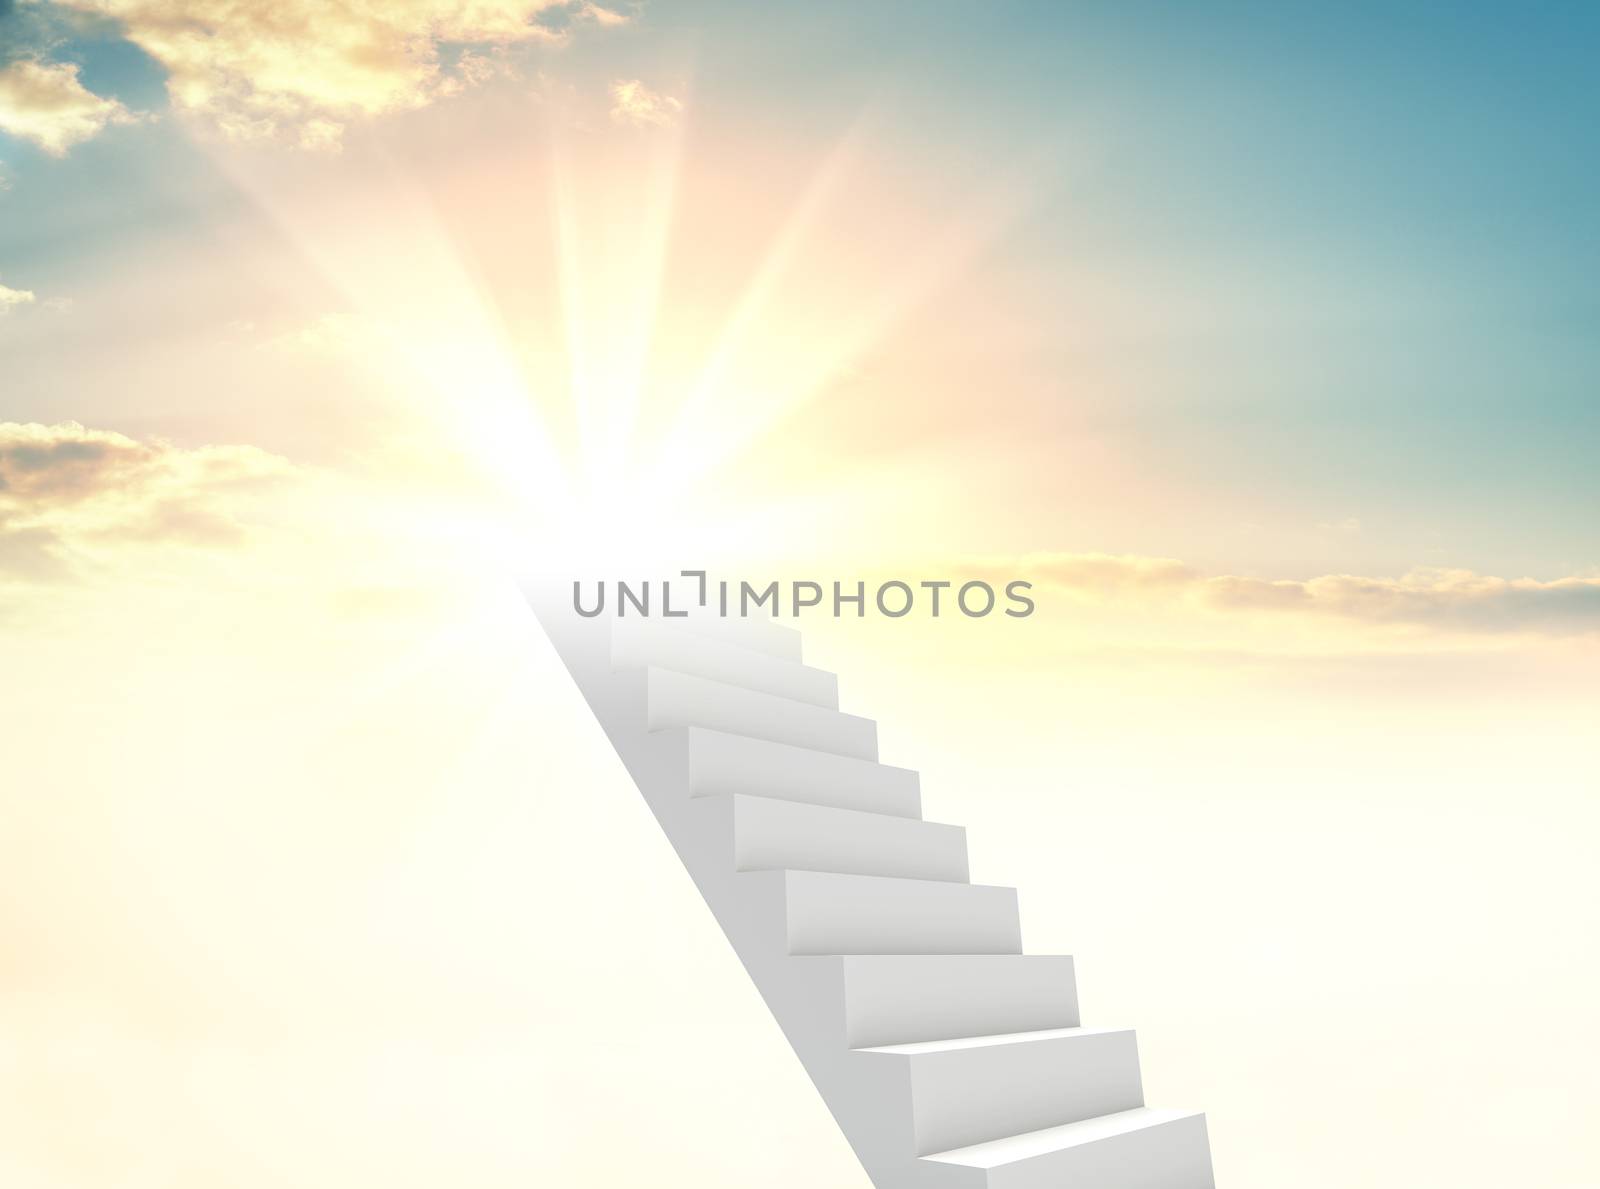 The white staircase is going up in the sun. The concept of success, achievement of a goal or religion. 3d illustration